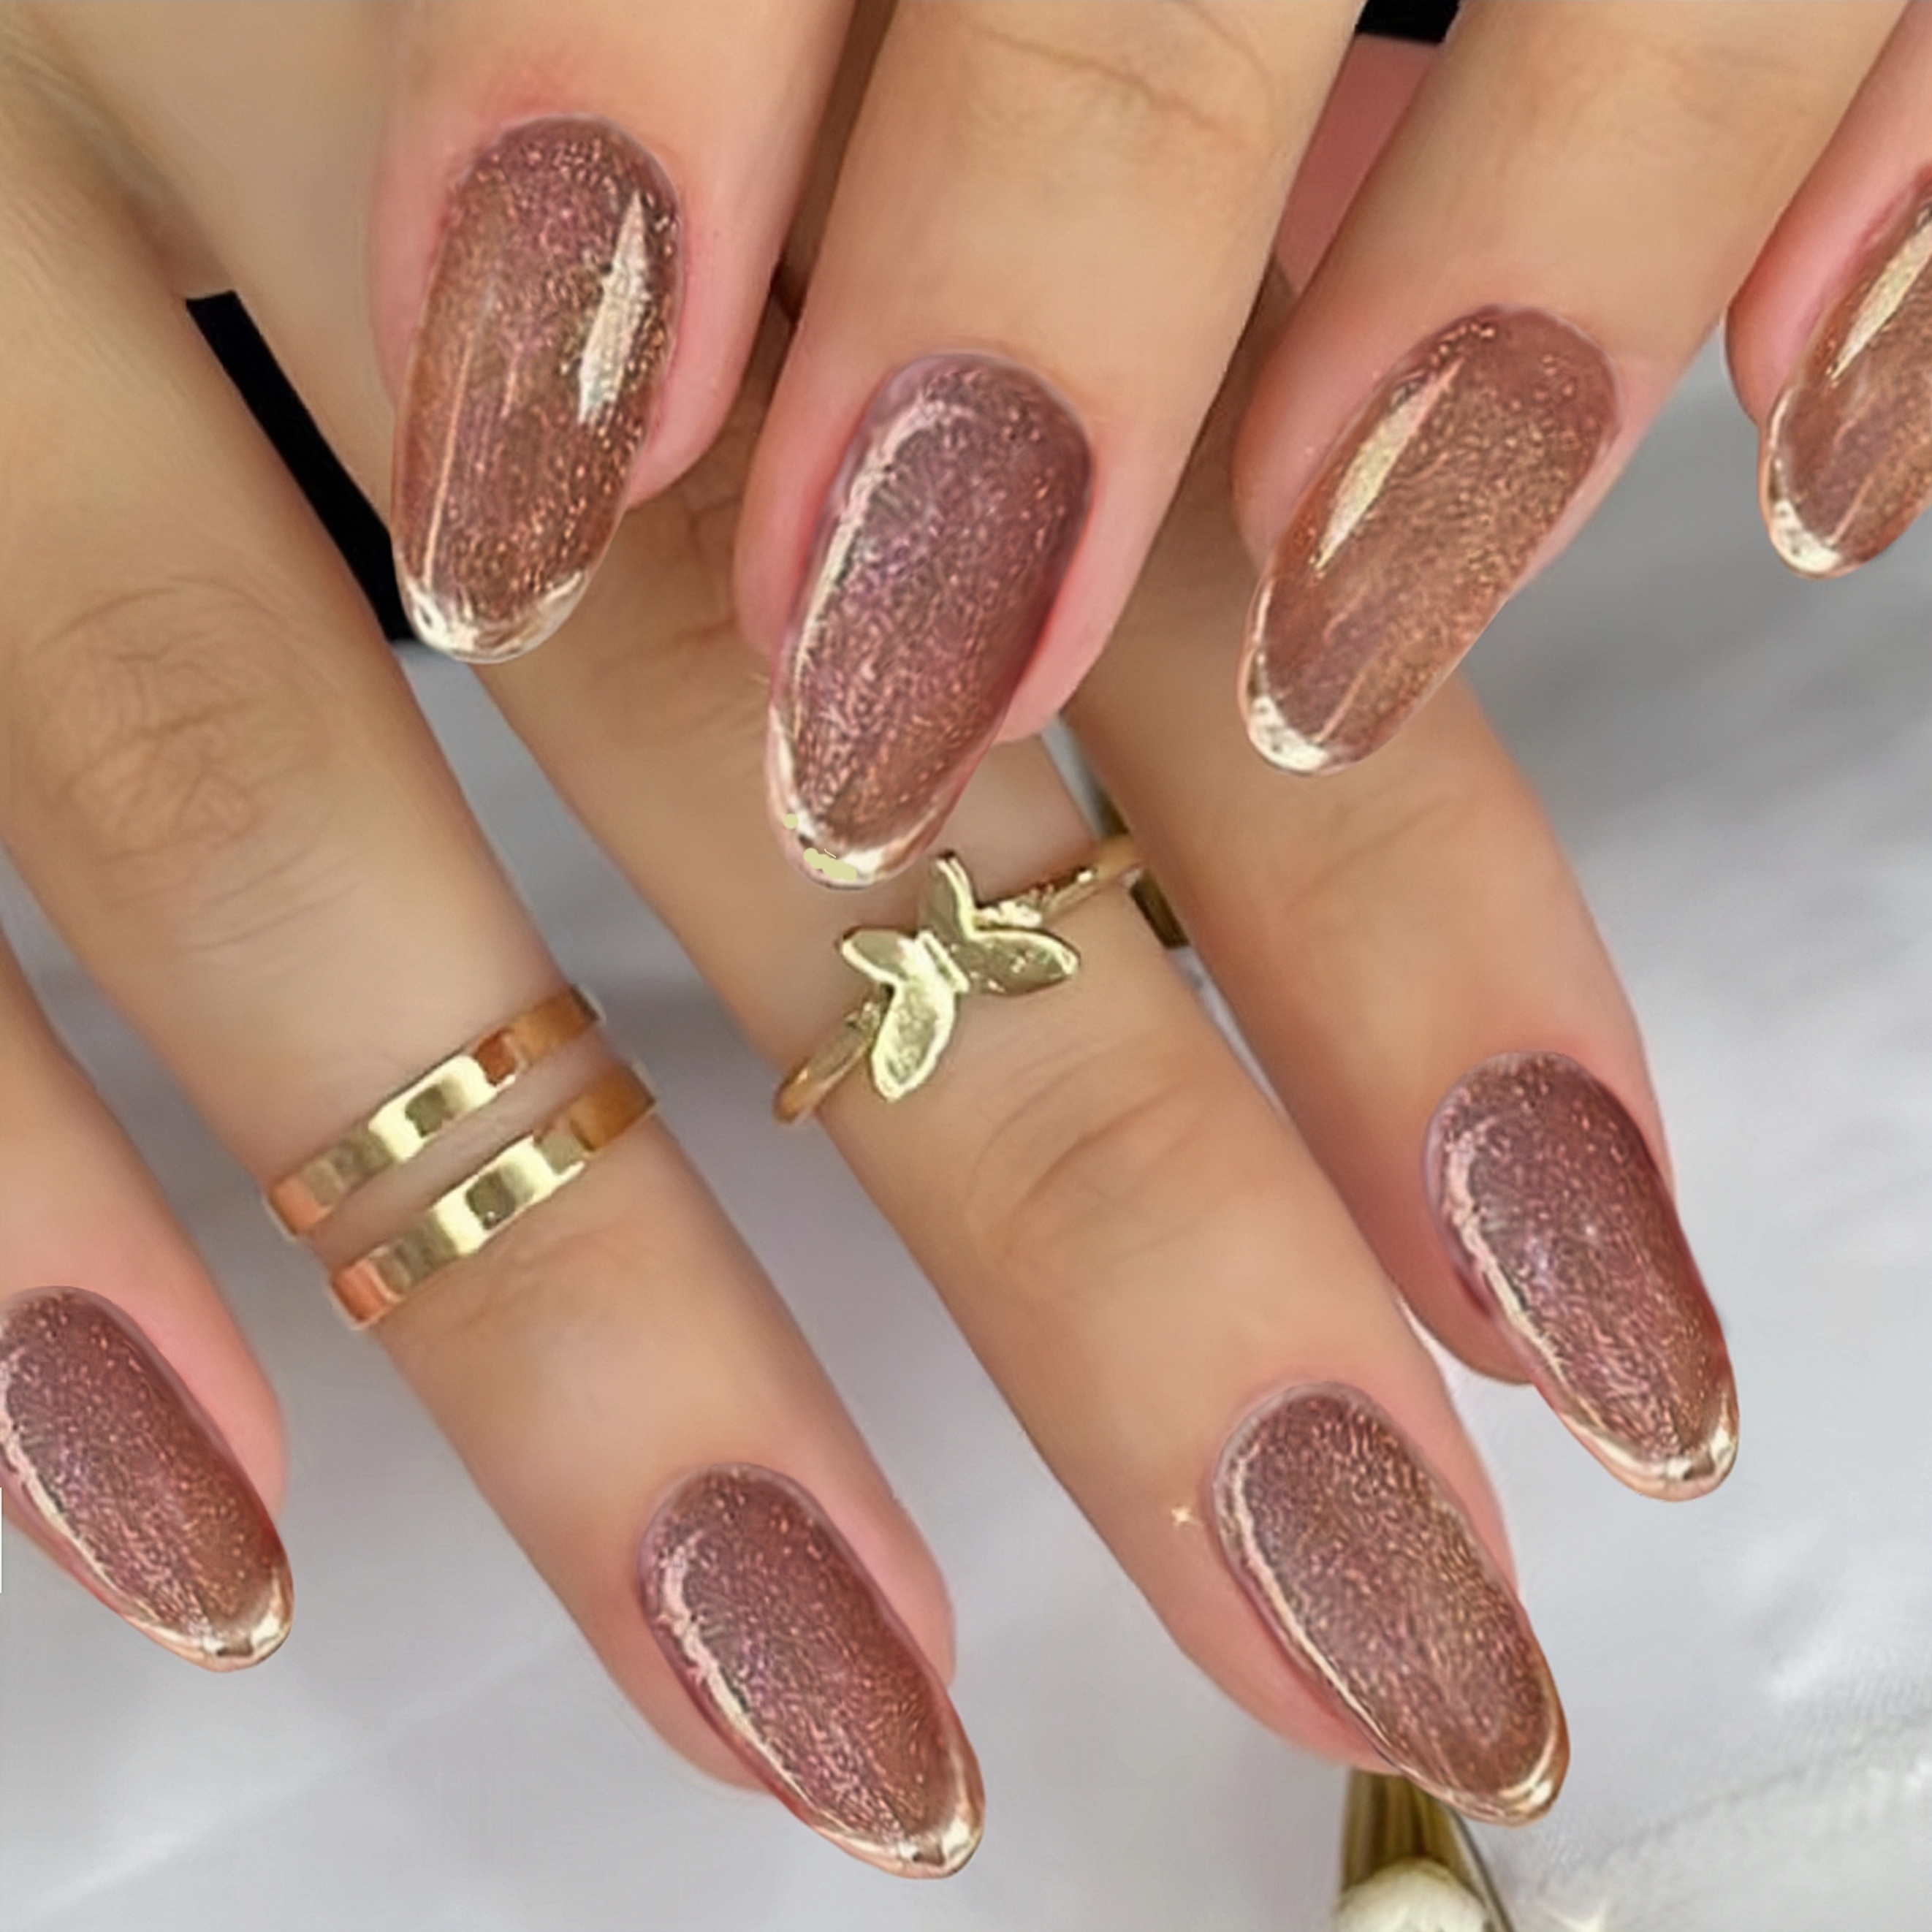 

24pcs Glossy Nude Glitter Press On Nails With Golden Edge And Full Cover Medium Oval Design - Easy To Apply And Remove With Glue Sticker And Nail File - Perfect For Women And Girls